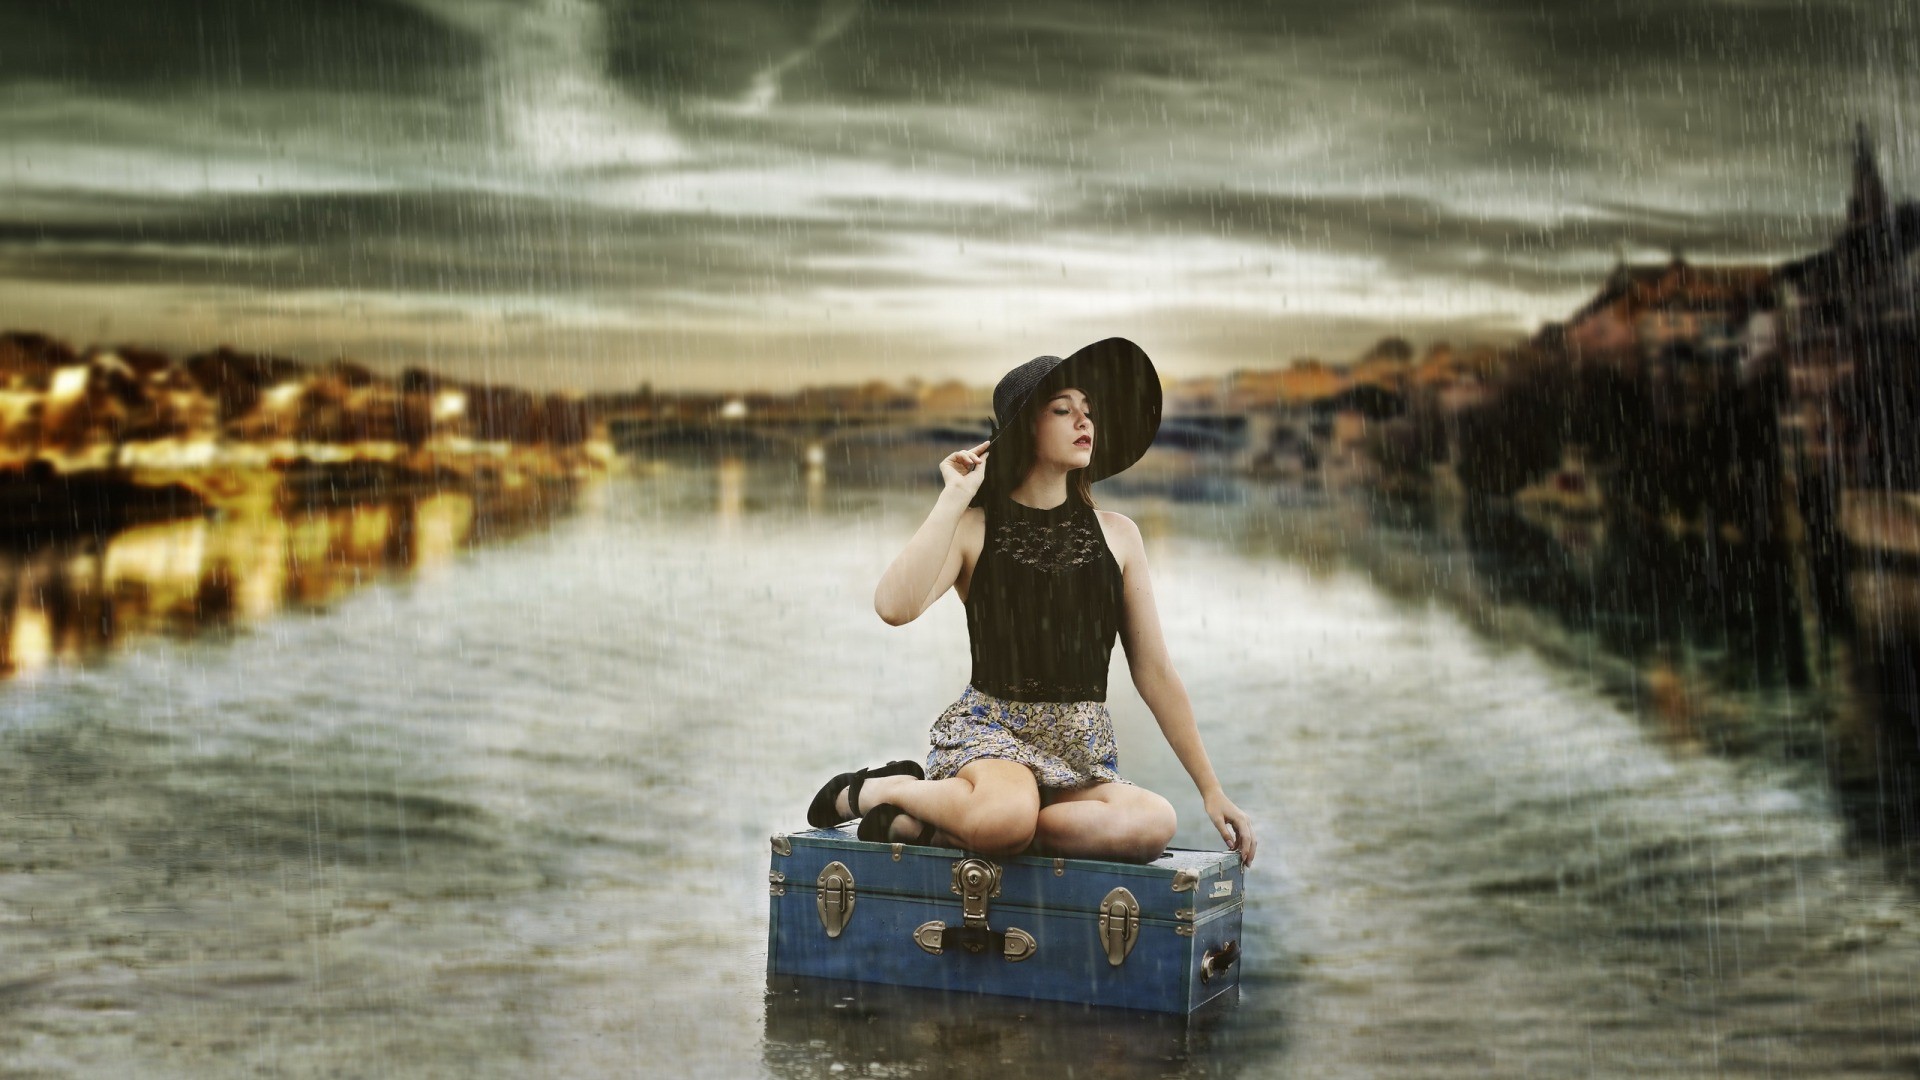 People 1920x1080 women model brunette long hair women outdoors sitting water river suitcase skirt black clothing bare shoulders open mouth closed eyes rain clouds cityscape building hat lights reflection